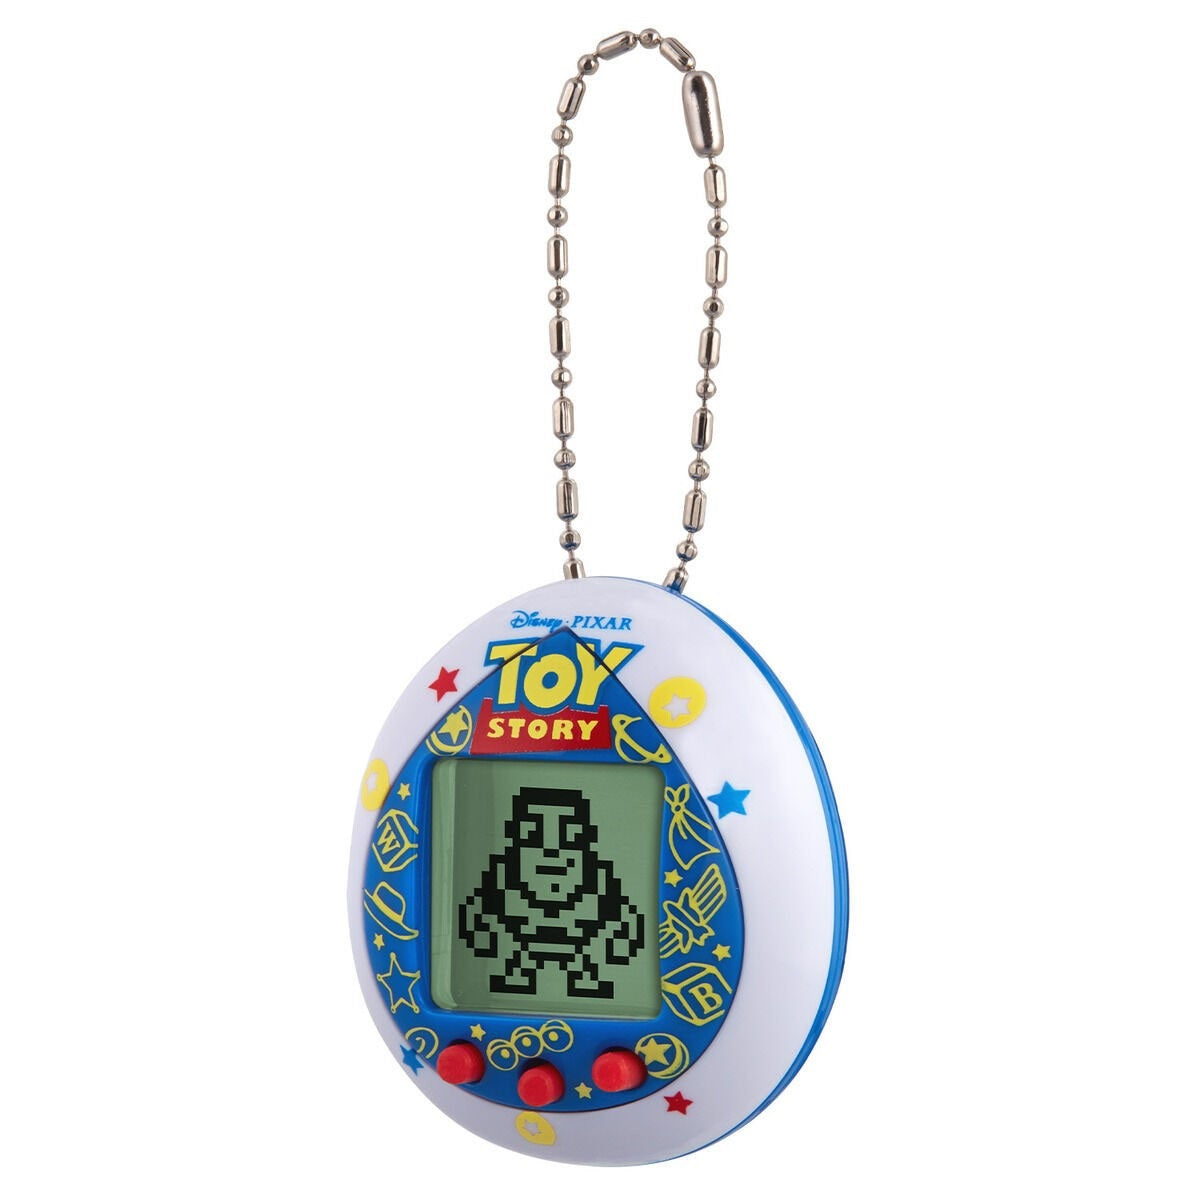 Toy Story: Tamagotchi Friends Paint Ver. (Electronic Toy)-Bandai-Ace Cards &amp; Collectibles